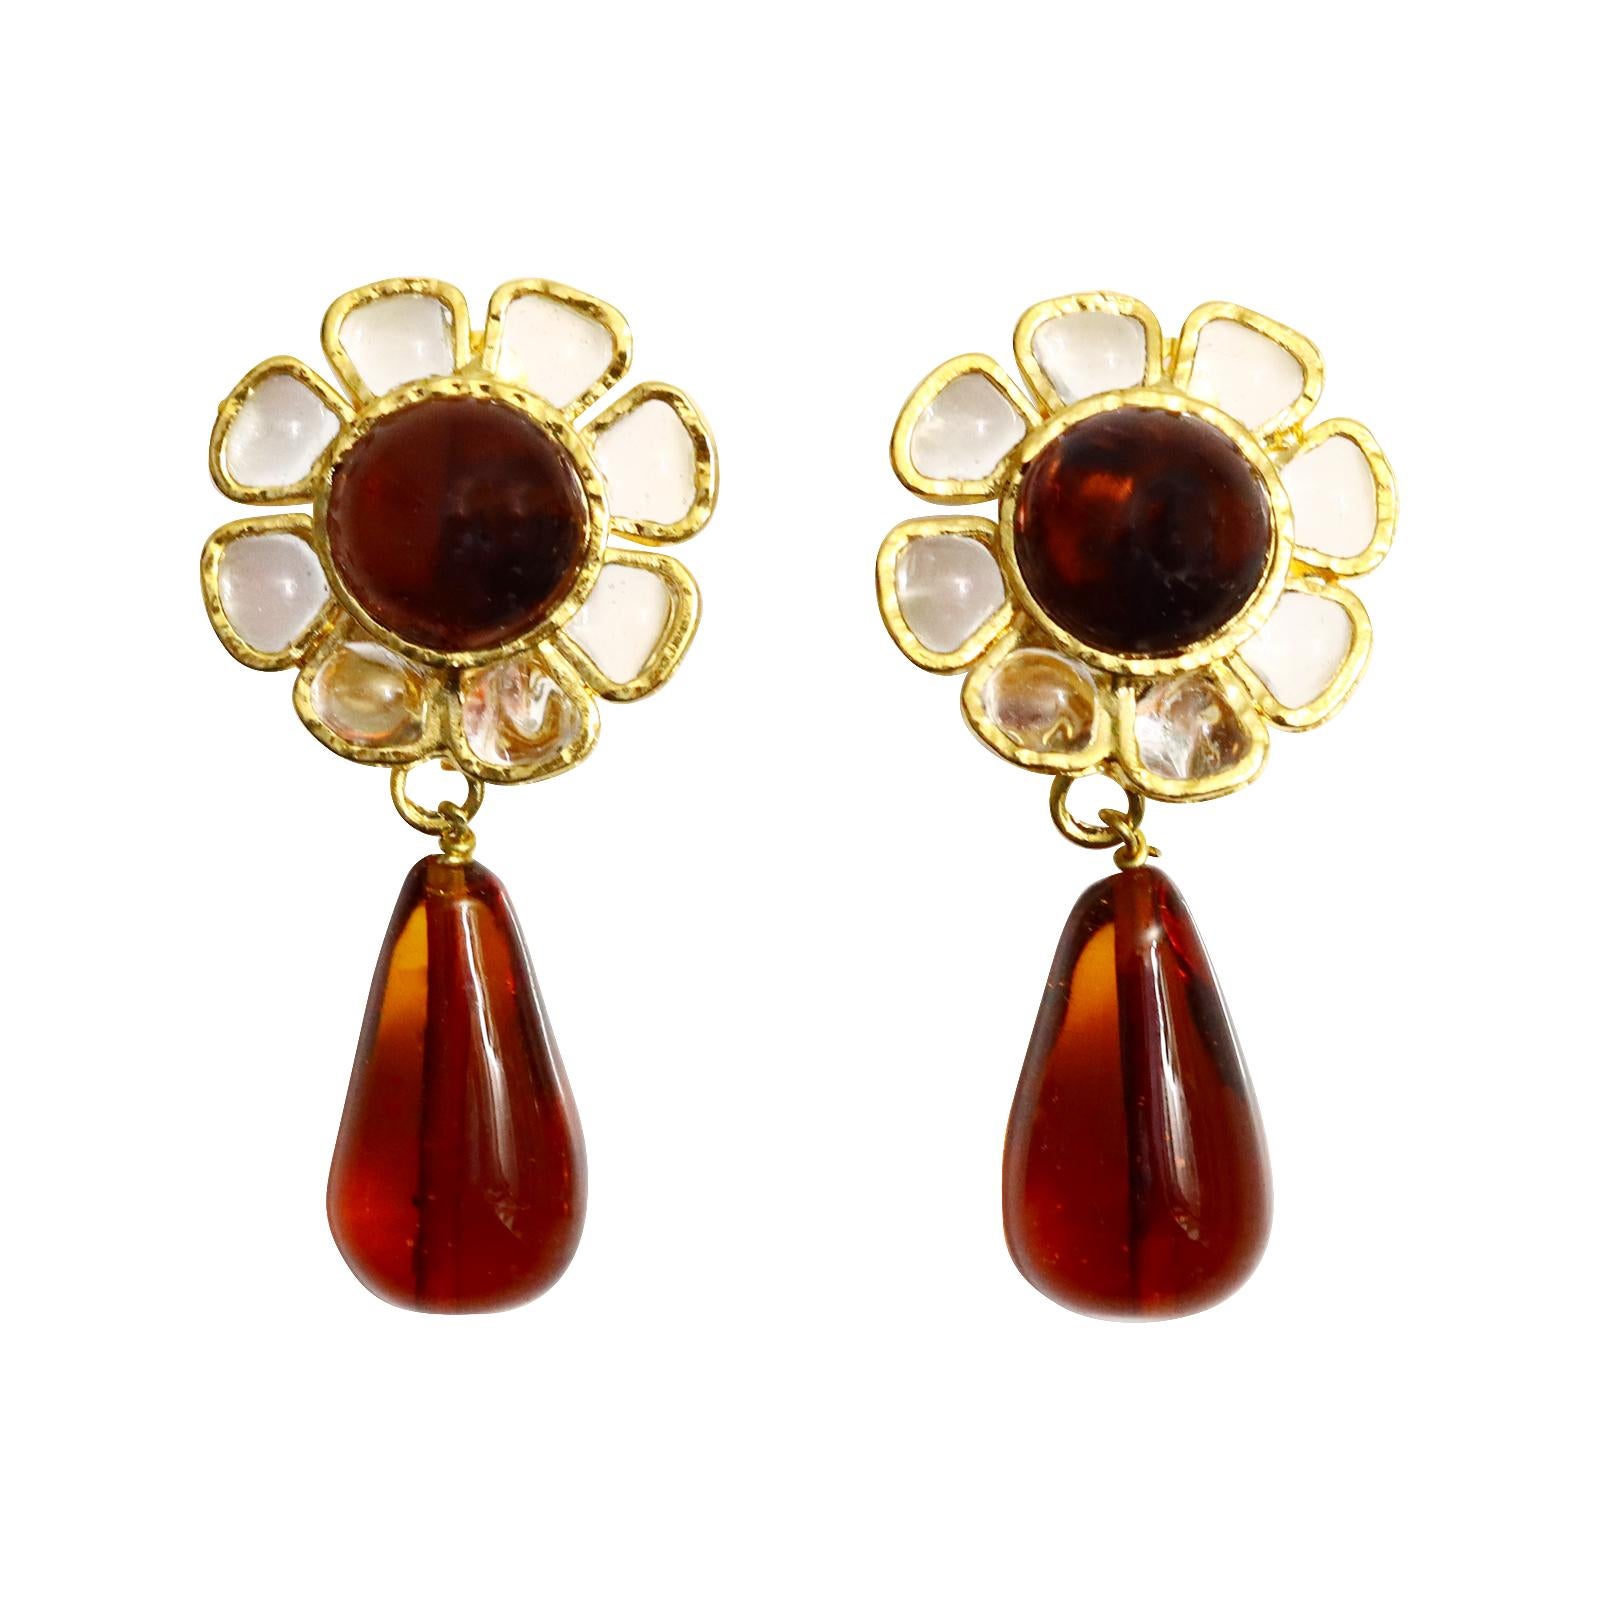 Vintage Maison Gripoix Clear and Muted Red/Orange Flower Earrings Circa 1980s 1